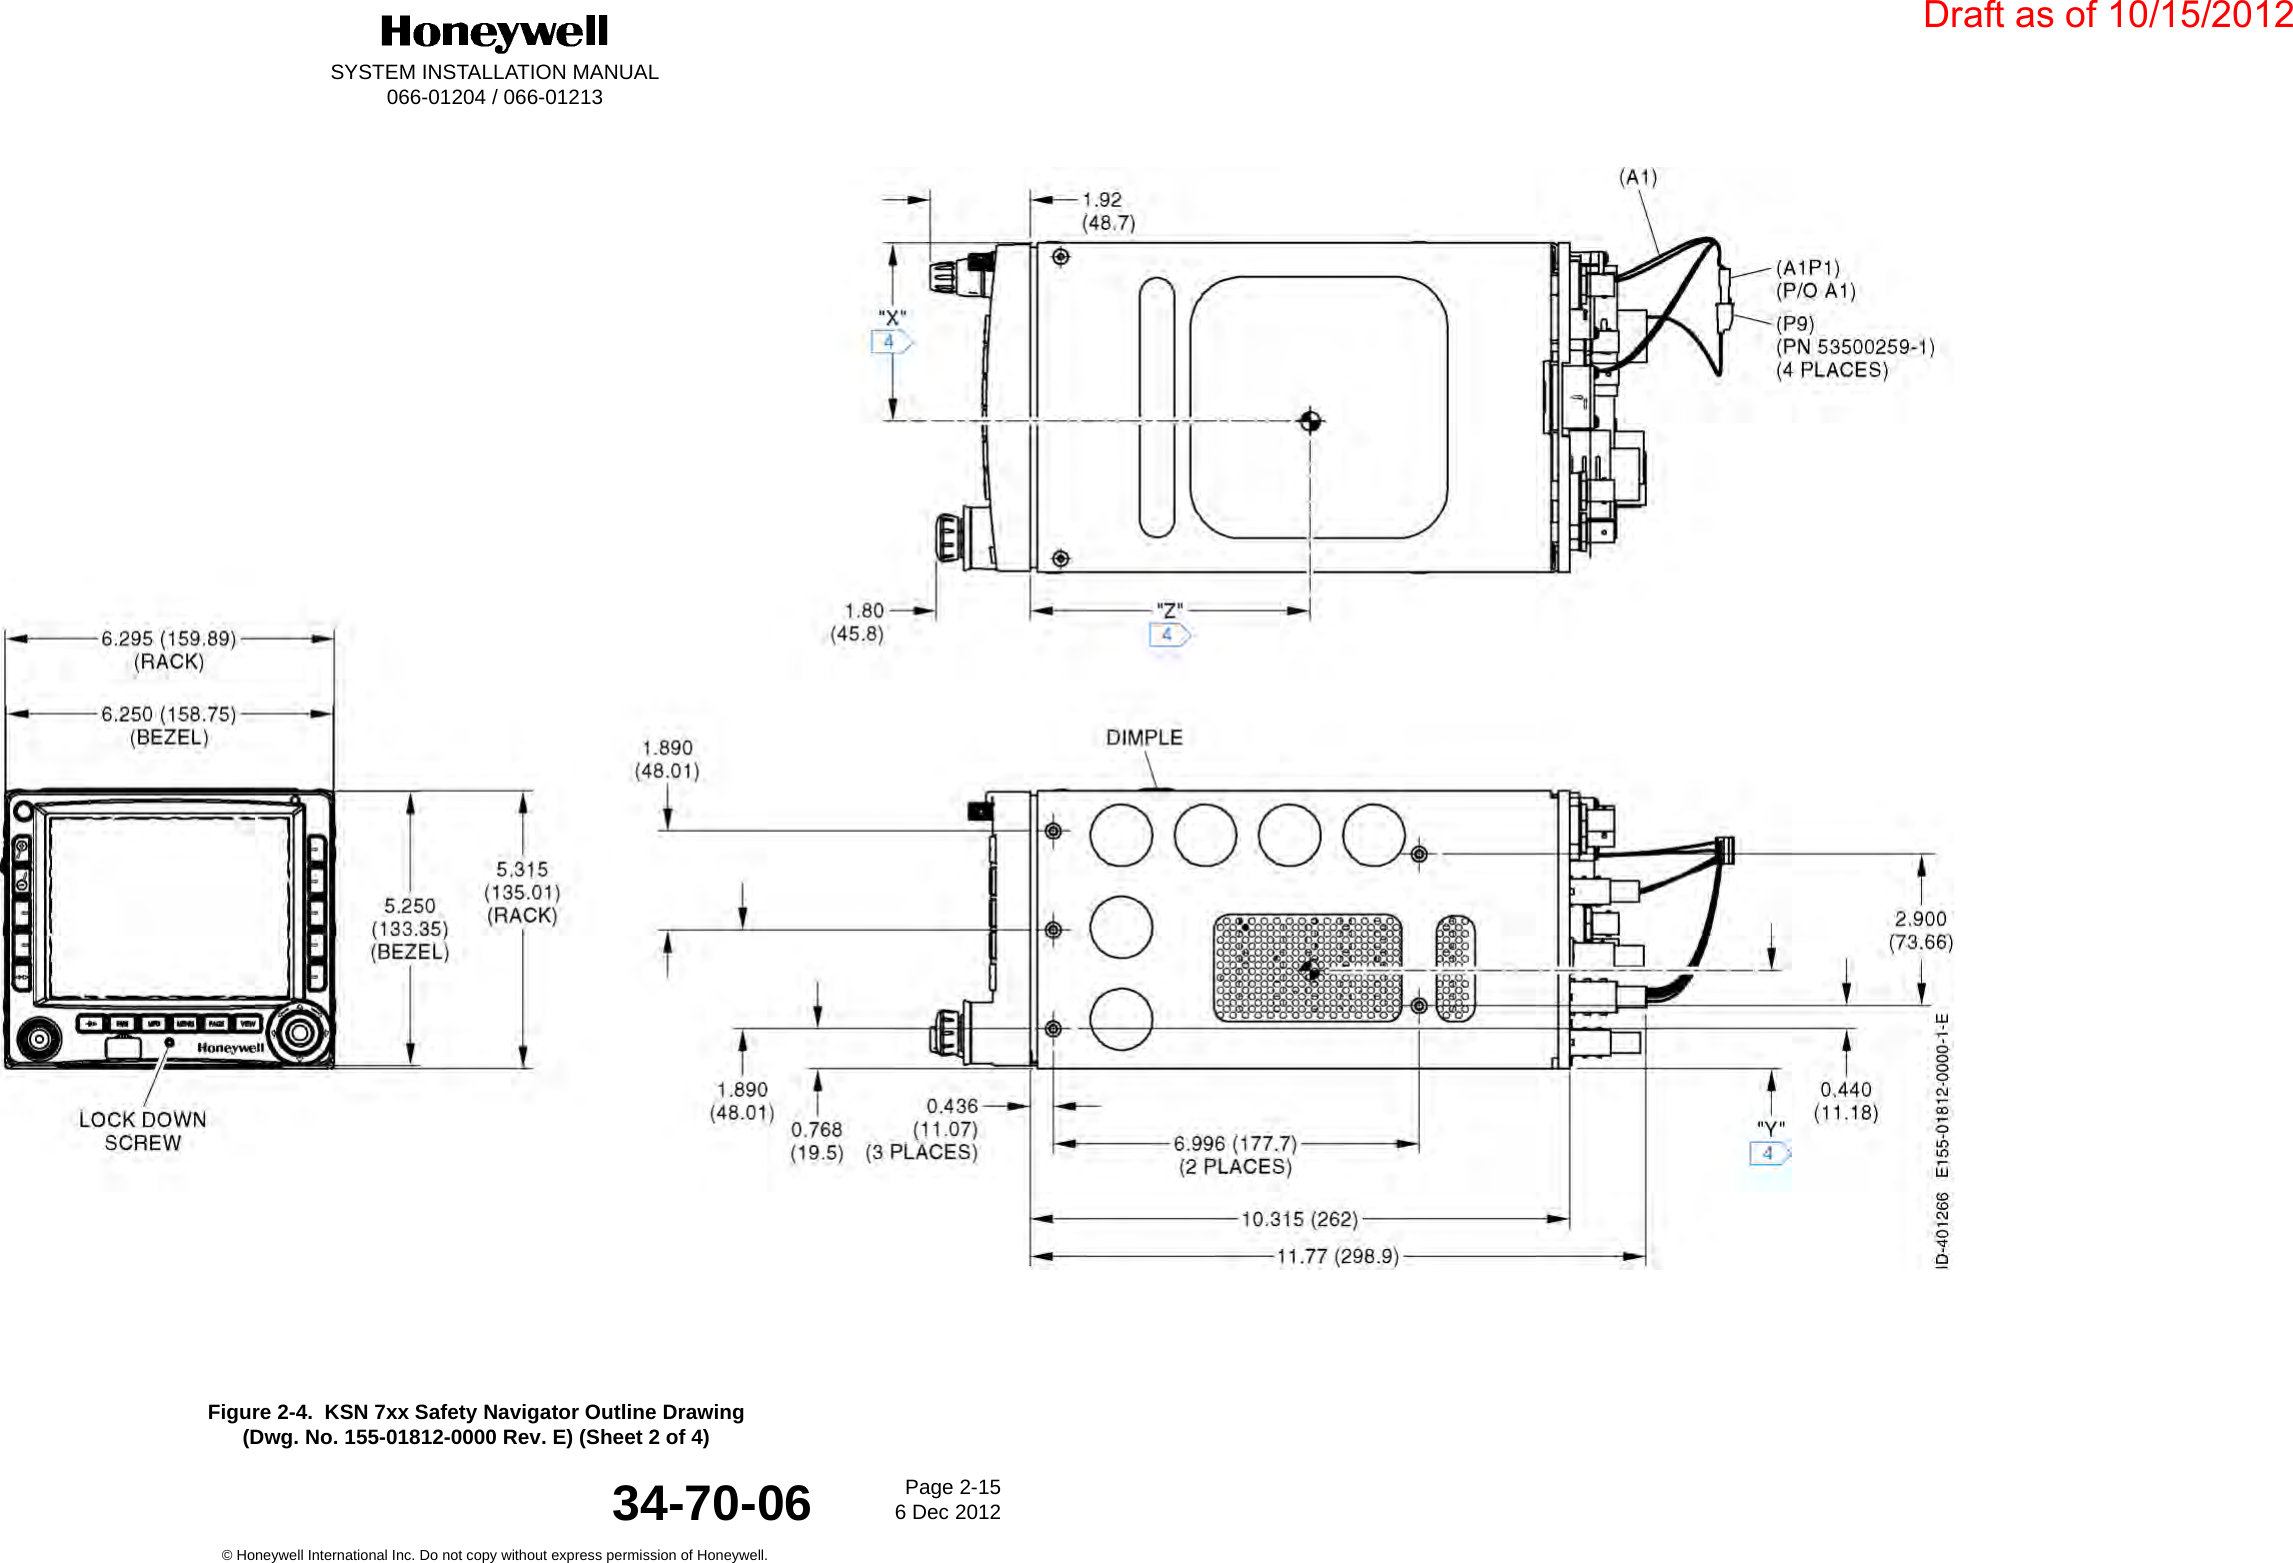 DraftSYSTEM INSTALLATION MANUAL066-01204 / 066-01213Page 2-156 Dec 2012© Honeywell International Inc. Do not copy without express permission of Honeywell.34-70-06Figure 2-4.  KSN 7xx Safety Navigator Outline Drawing(Dwg. No. 155-01812-0000 Rev. E) (Sheet 2 of 4)Draft as of 10/15/2012